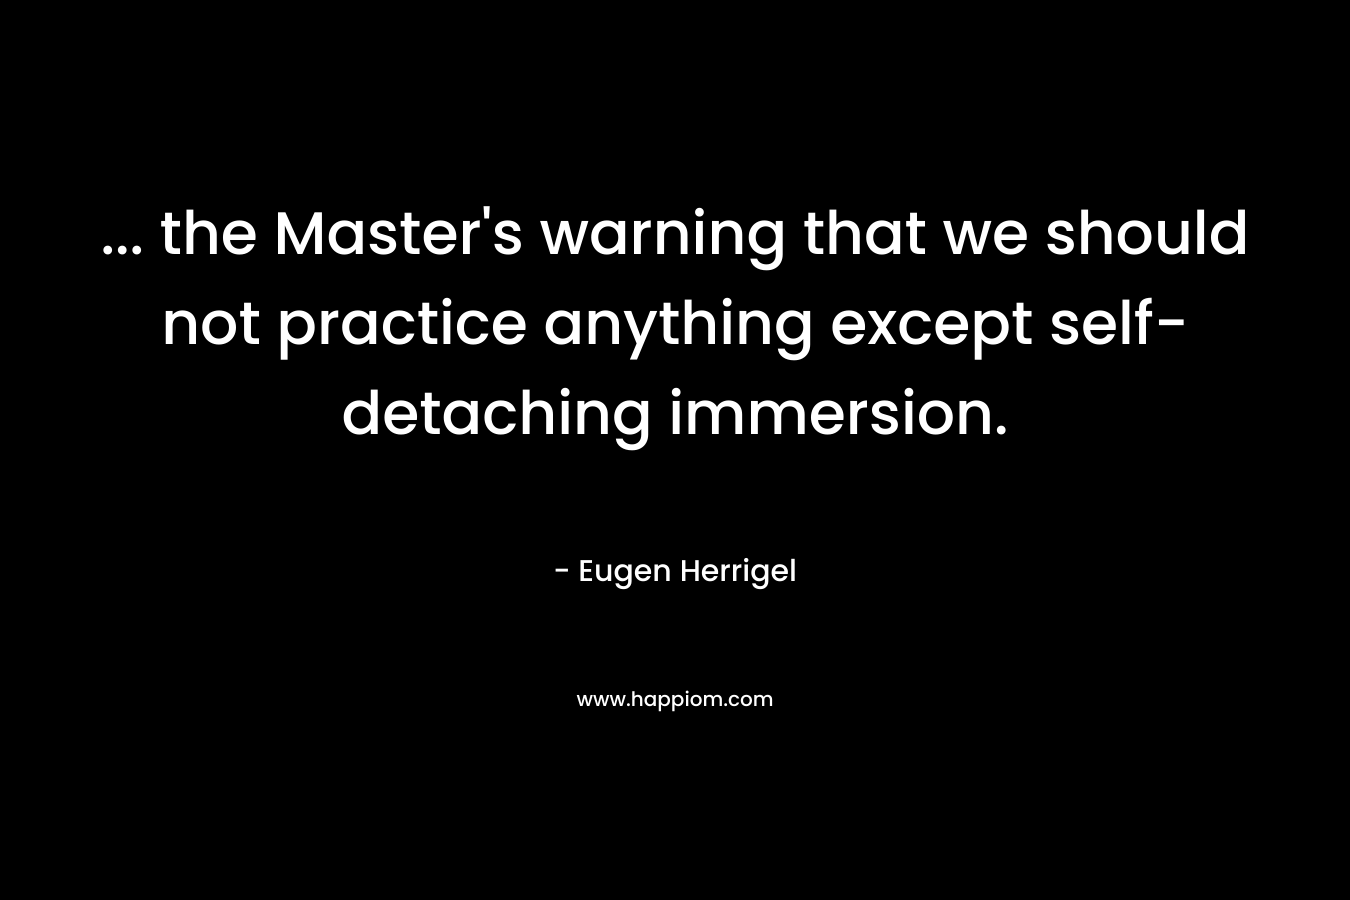 … the Master’s warning that we should not practice anything except self-detaching immersion. – Eugen Herrigel